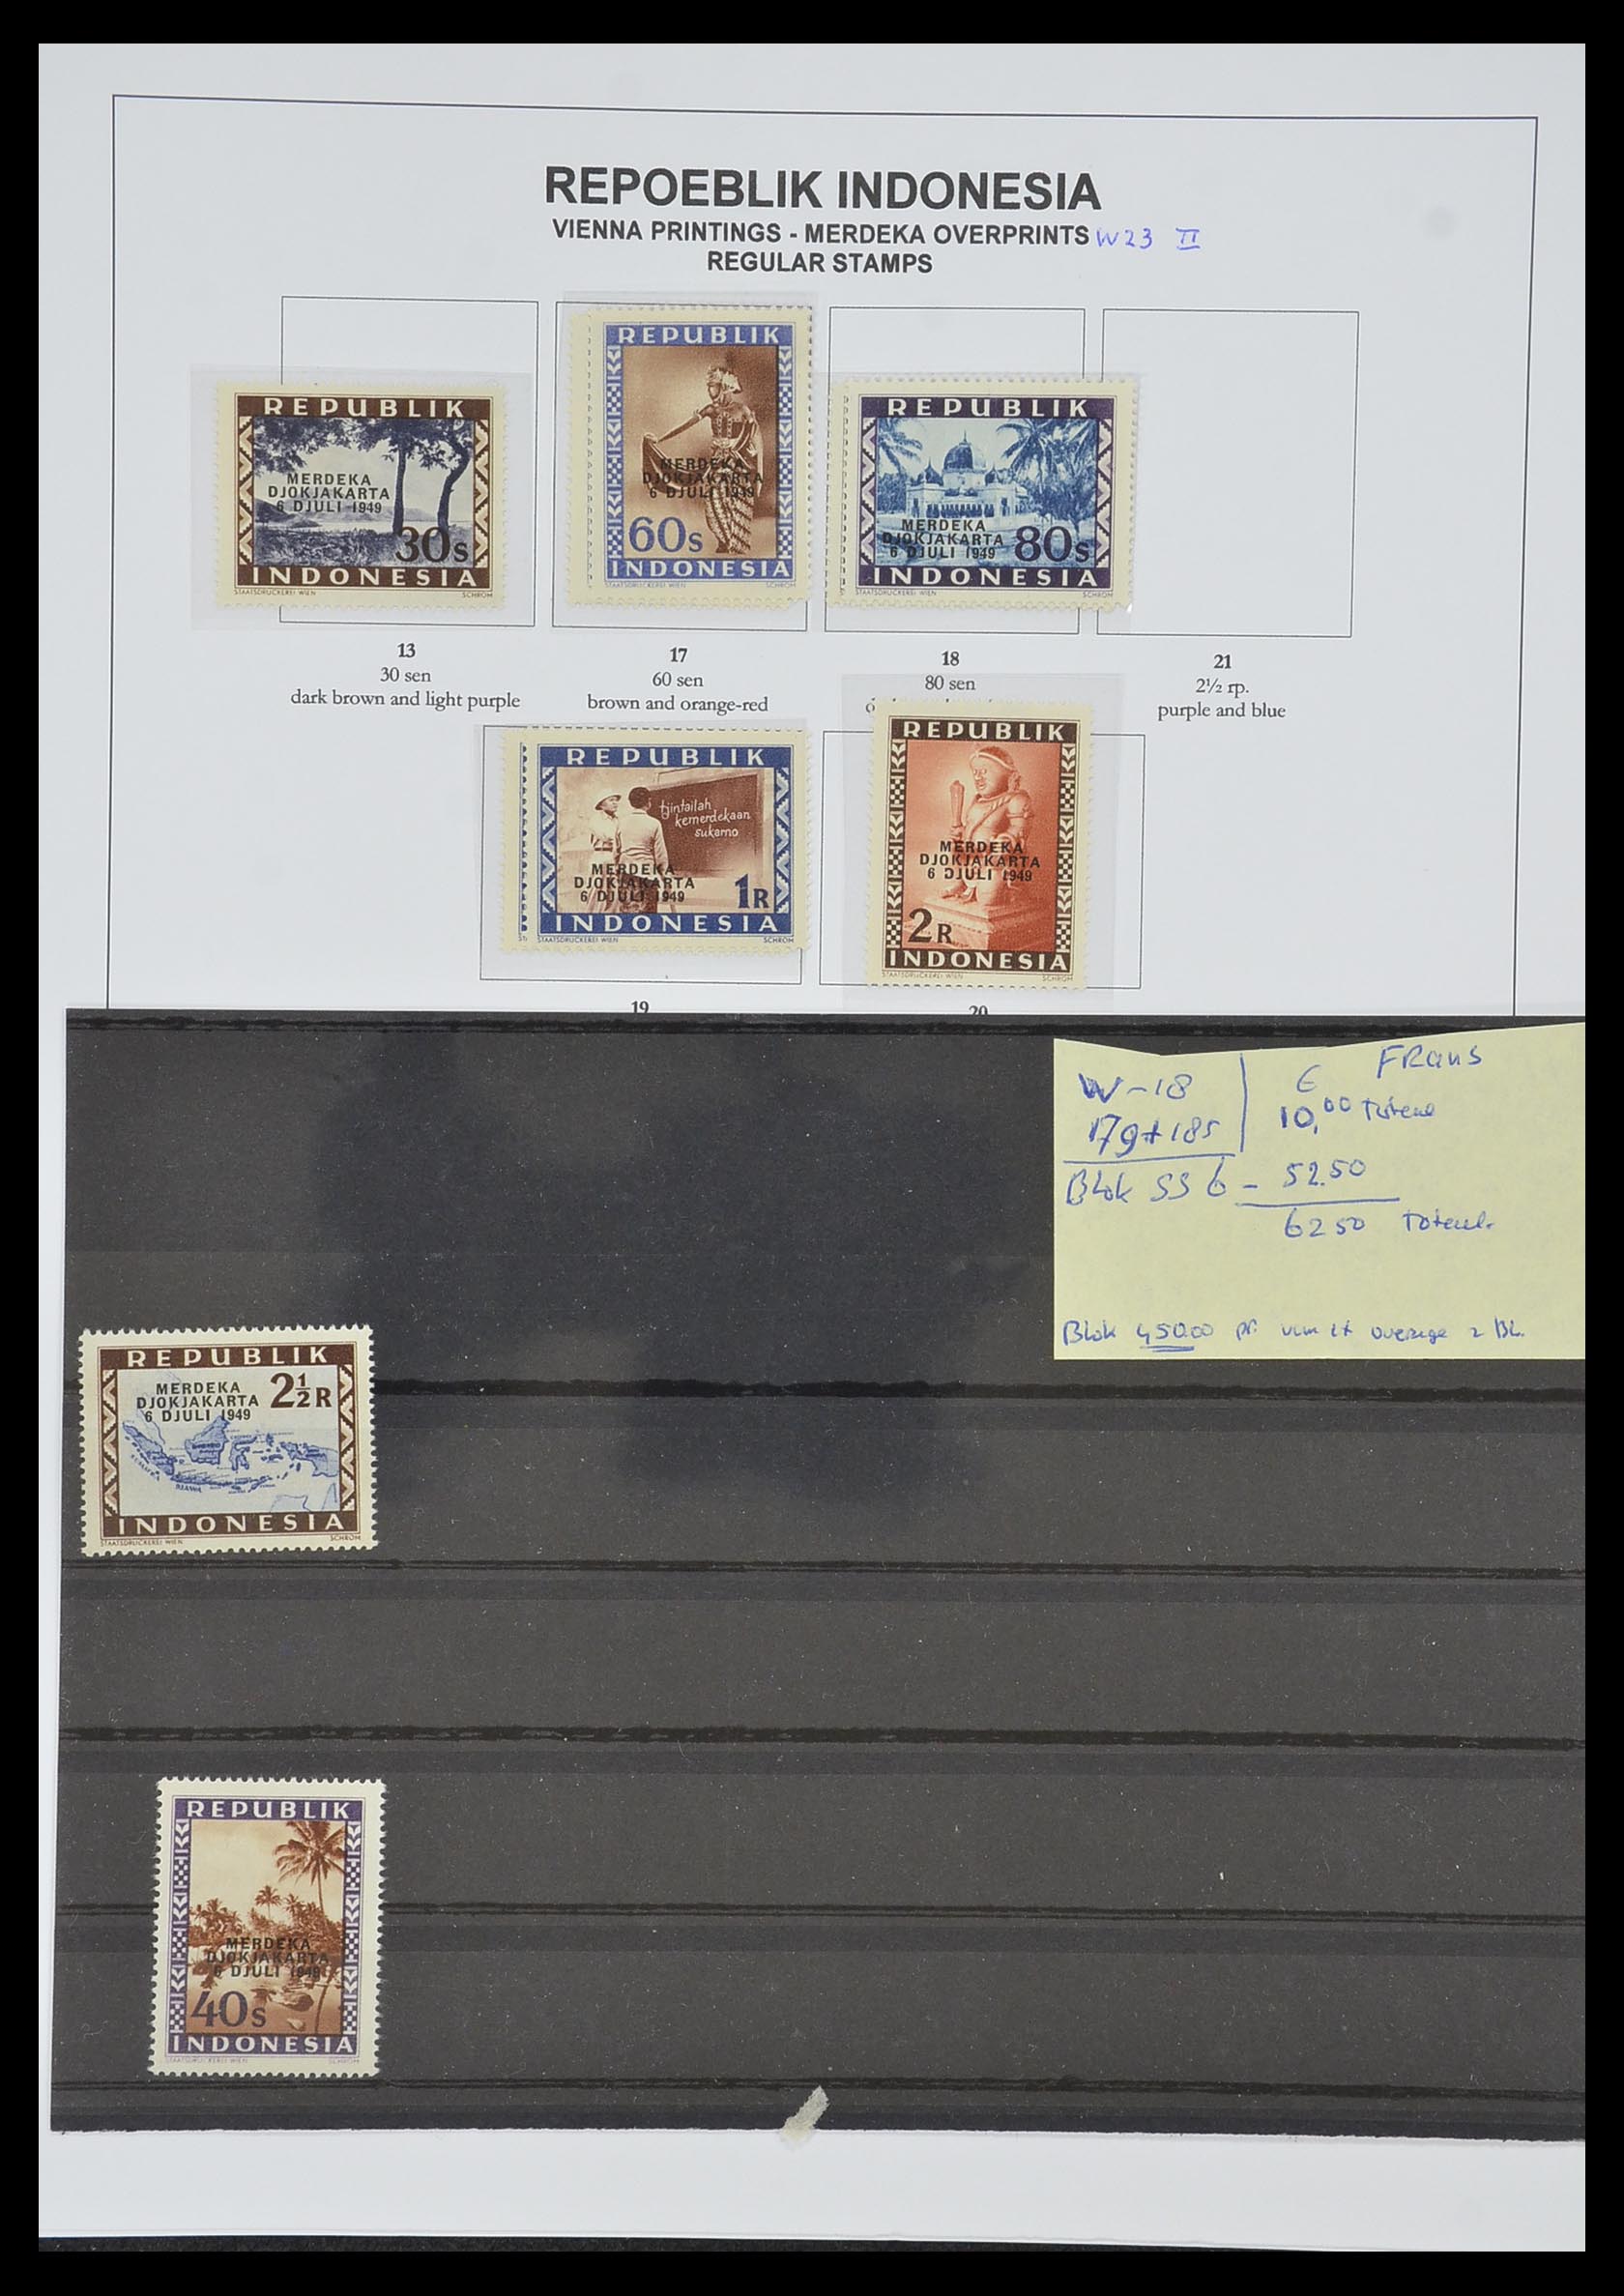 33988 038 - Stamp collection 33988 Vienna printings Indonesia.